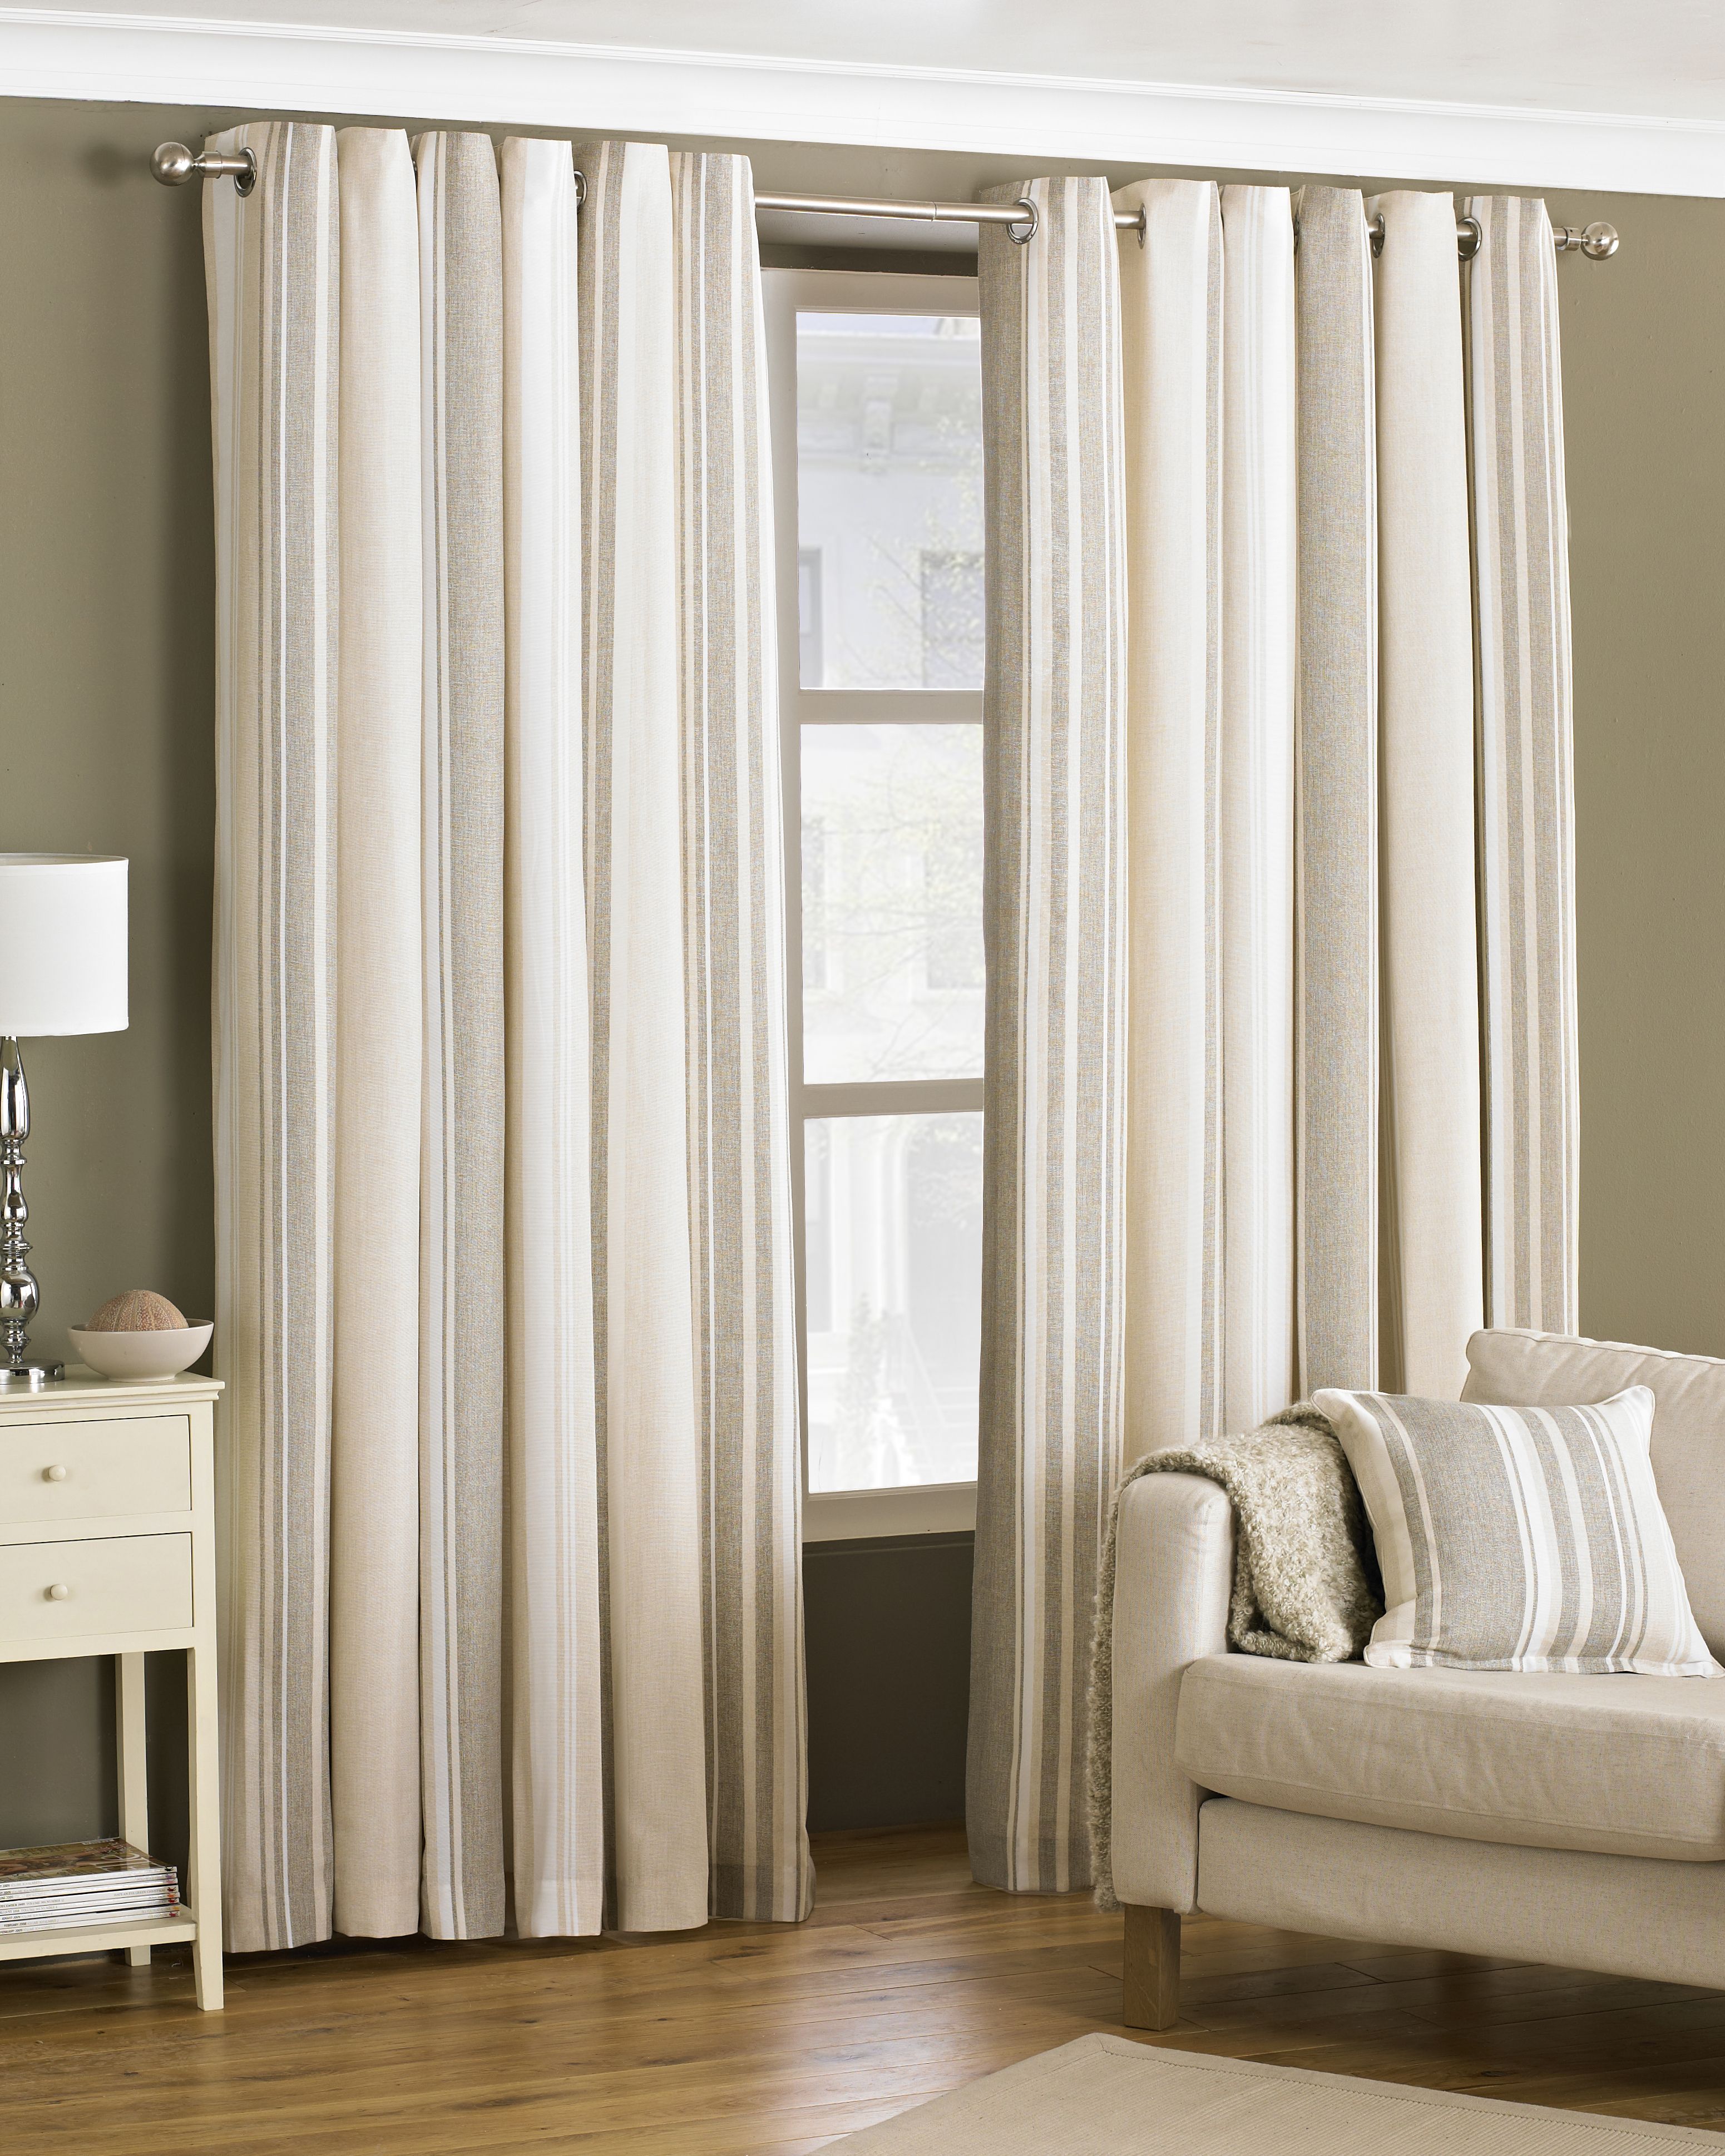 A wonderful and well co-ordinated stripe design allows the Broadway lined eyelet curtains to provide a touch of contemporary appeal to any room. Fully lined and crafted from cotton rich material, the Broadway curtains create a tastefully stylish atmosphere, along with an eyelet ring top heading for that extra modern touch. Made of polycotton these curtains are incredibly soft making them fall effortlessly while also able to withstand the everyday wear and tear of a hectic household. These curtains feature stainless steel eyeless holes for easy installation with no need for hooks or rings - you need only supply the curtain pole. As these curtains are a delicate addition to your home they will need extra care and are therefore dry clean only, however can still be ironed.